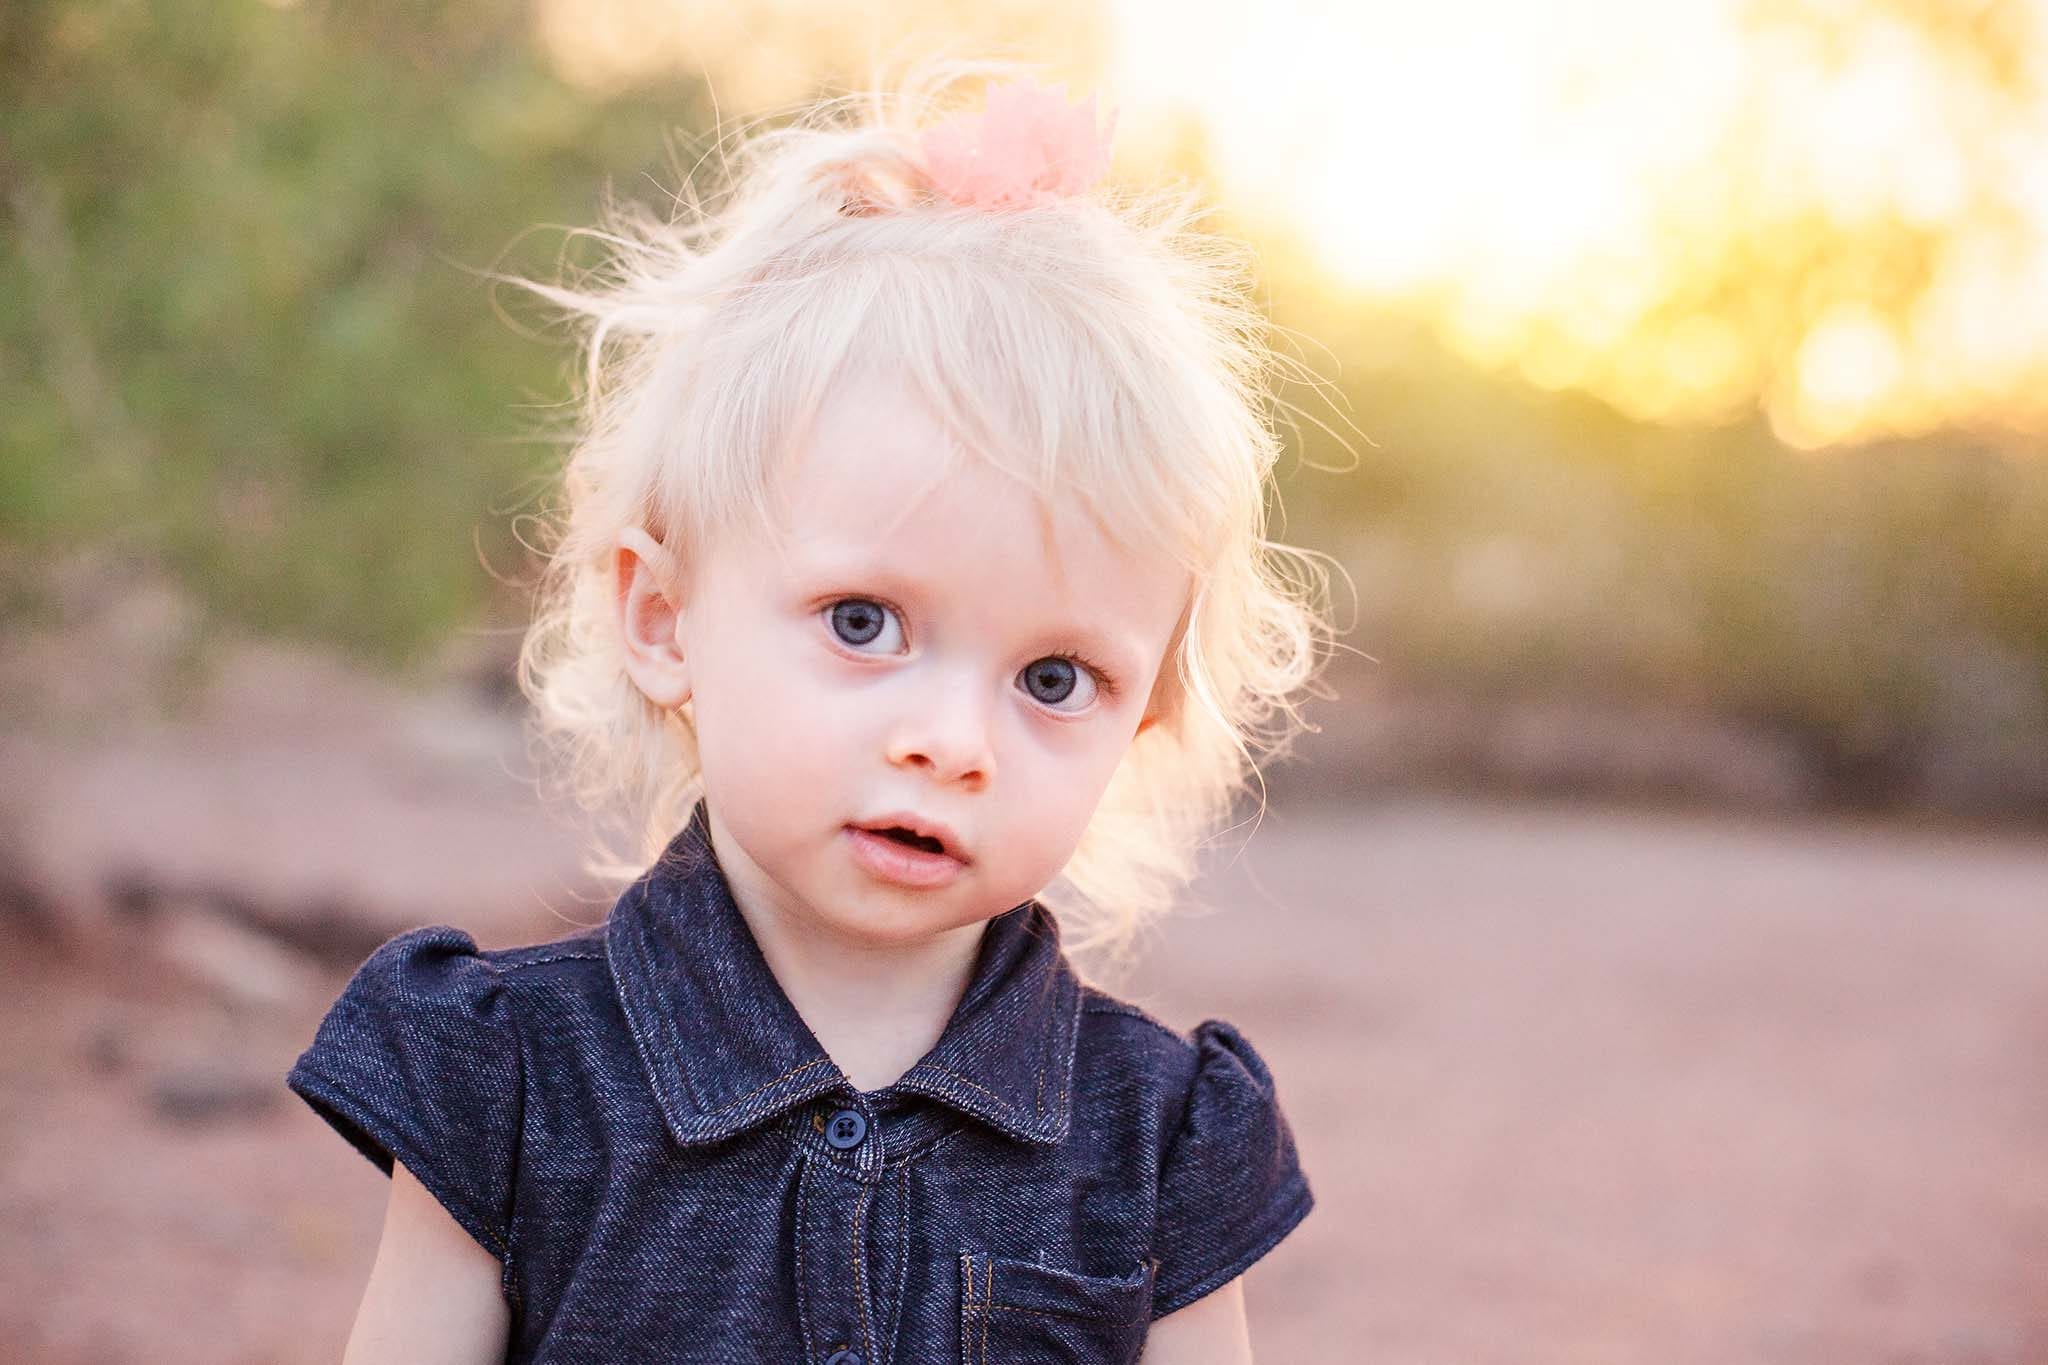 Two year old portrait outdoors at sunst